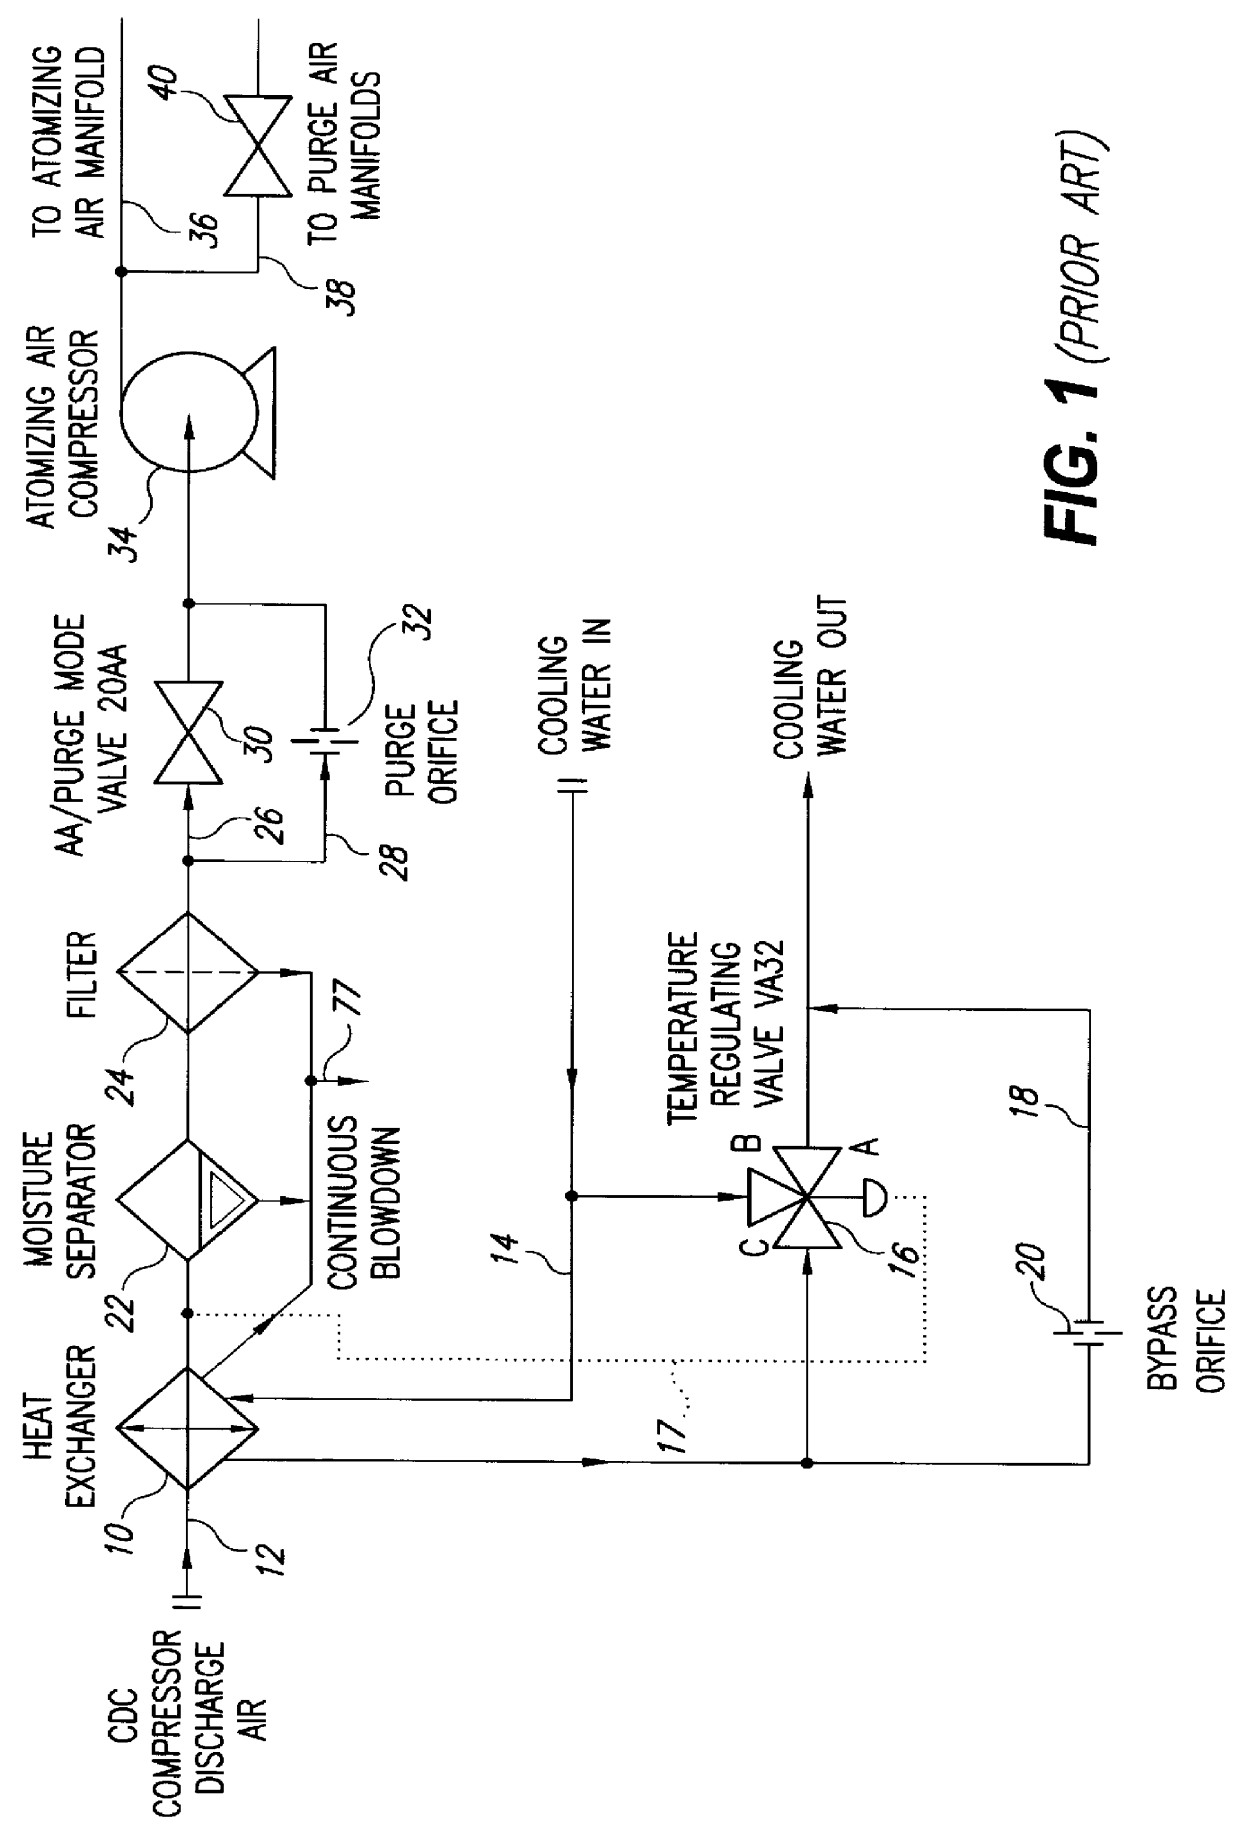 Dual orifice bypass system for dual-fuel gas turbine